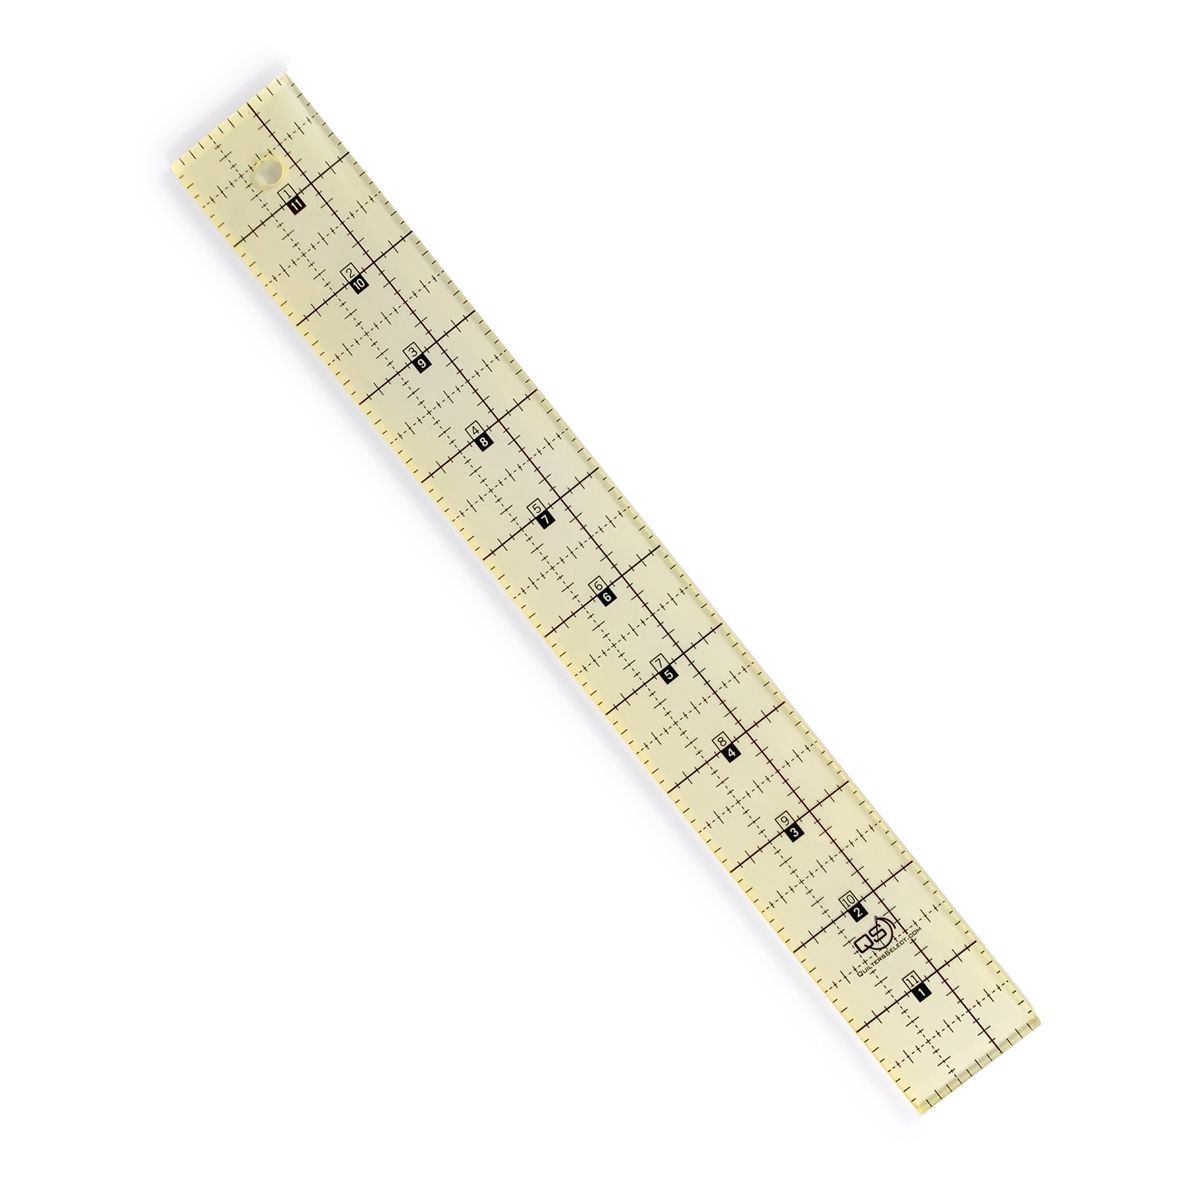 Quilters Select Non-Slip 2.5 x 18 Ruler - 844050013555